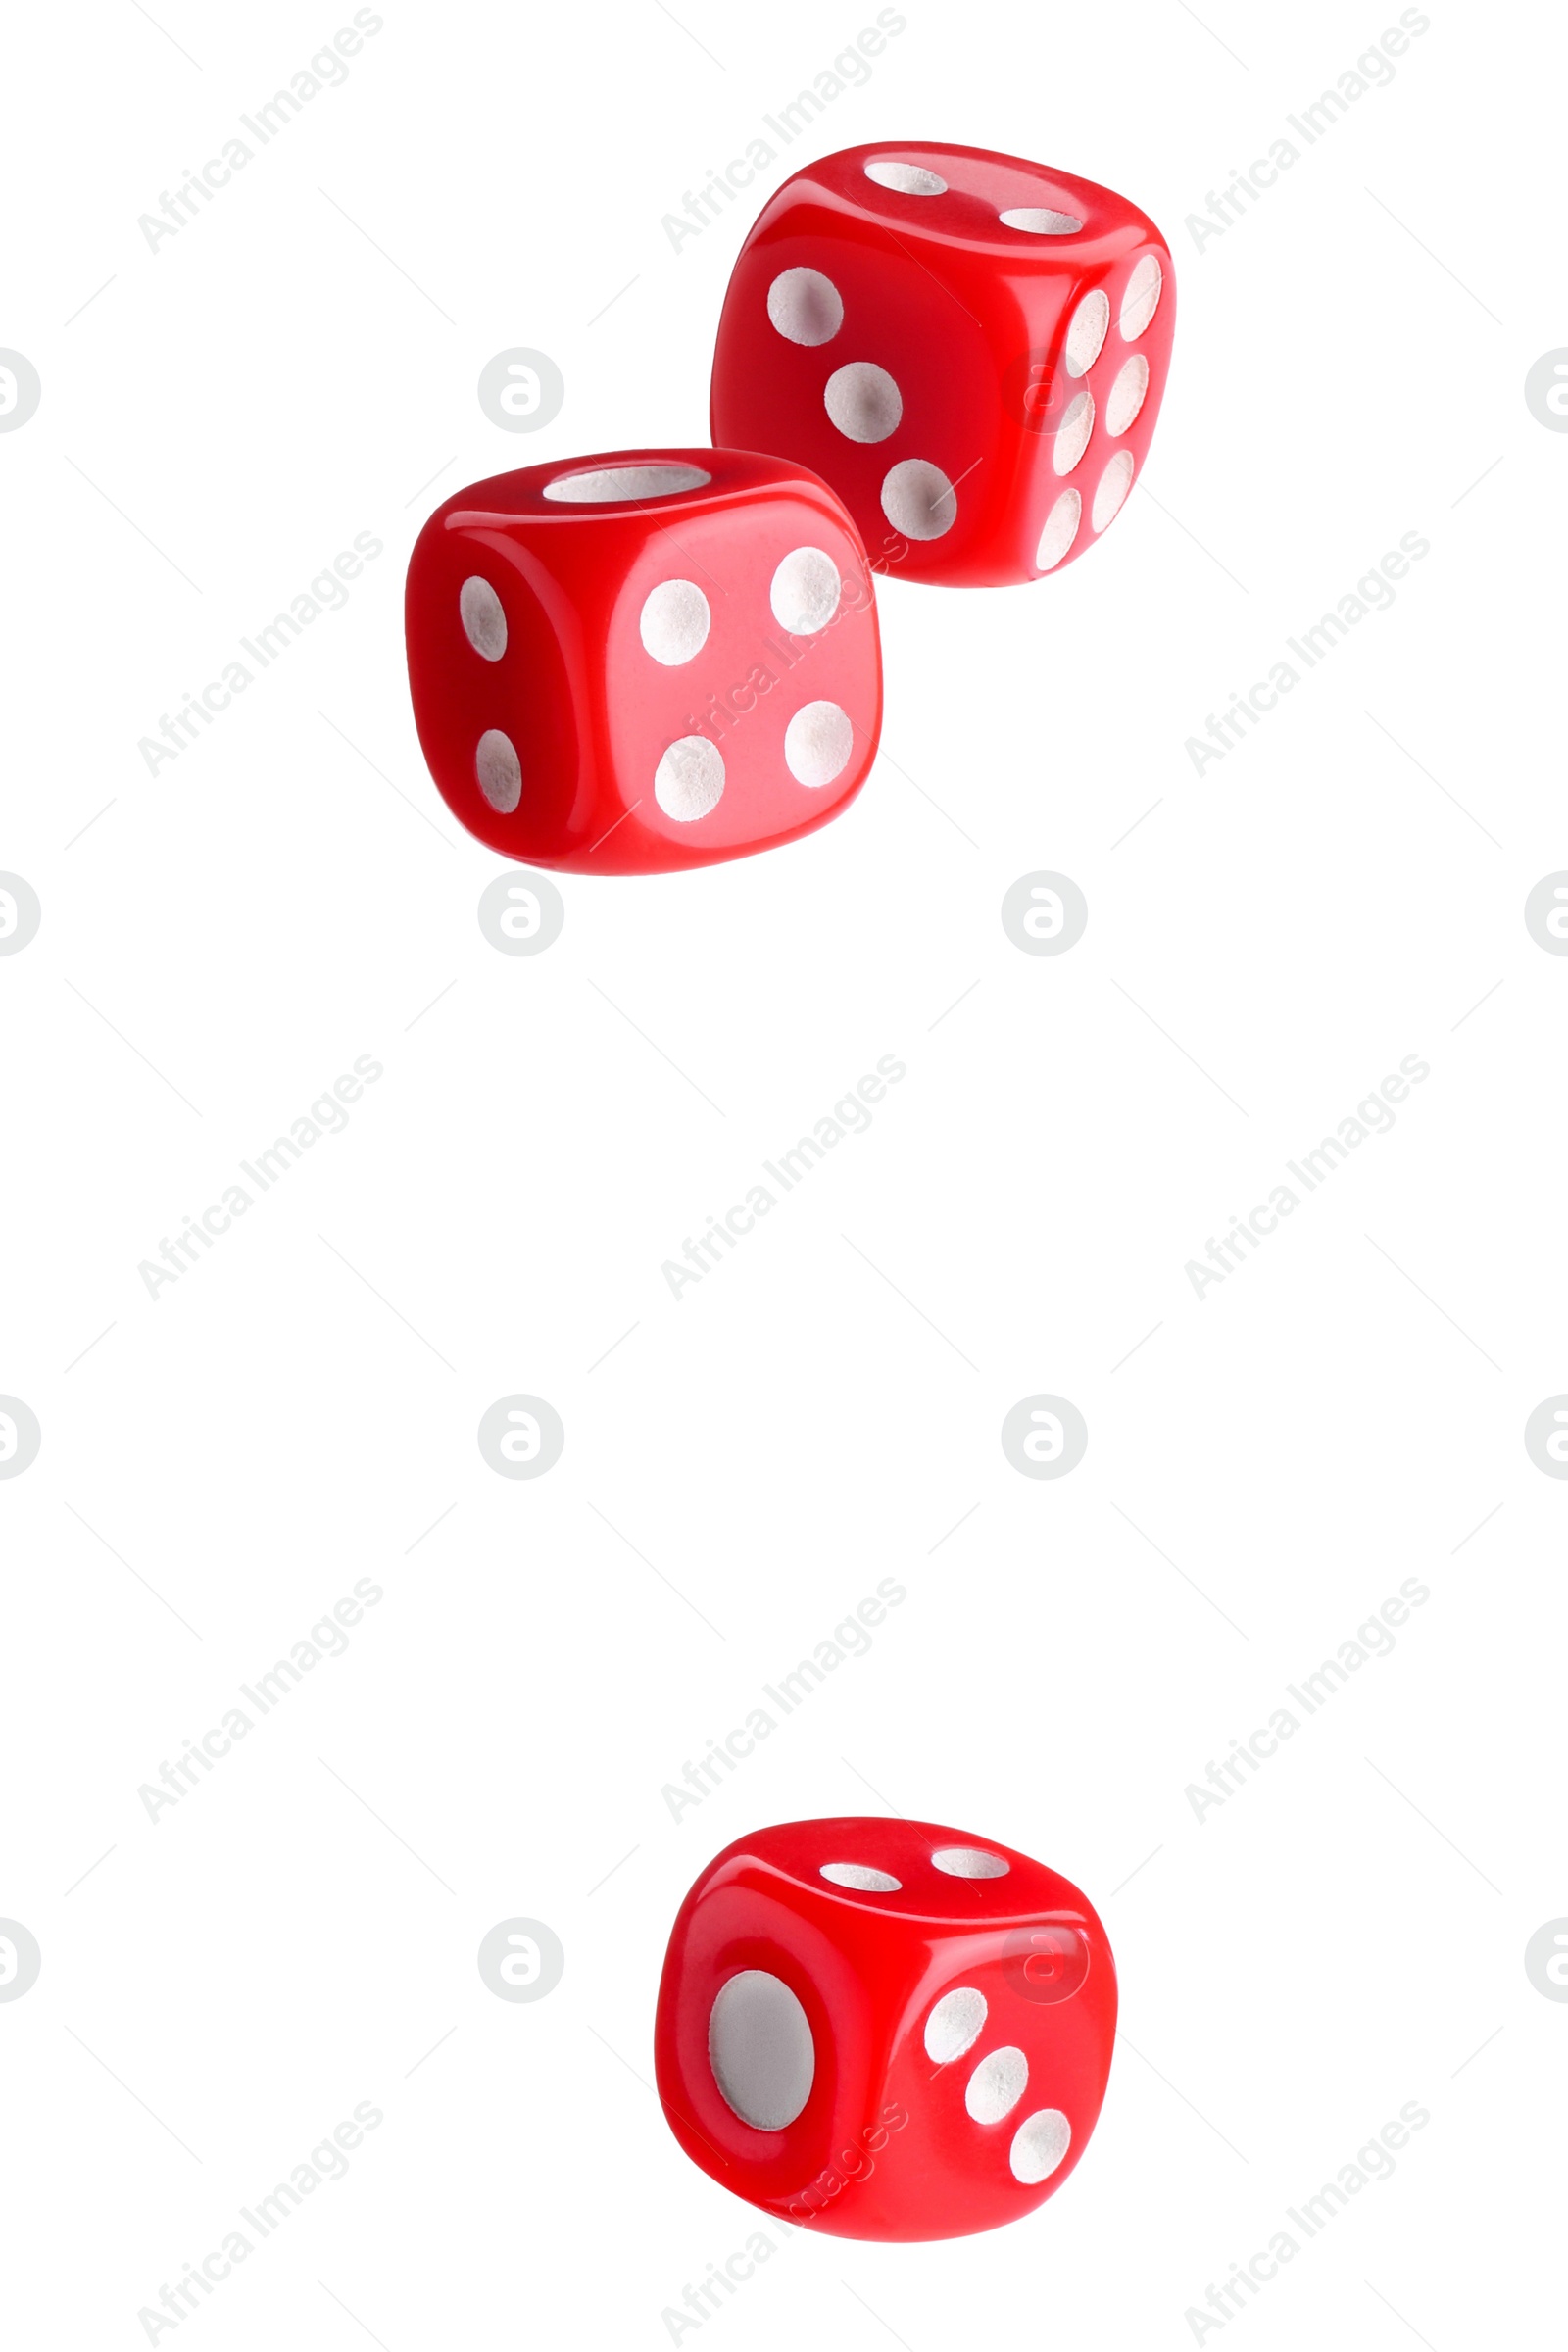 Image of Three red dice in air on white background